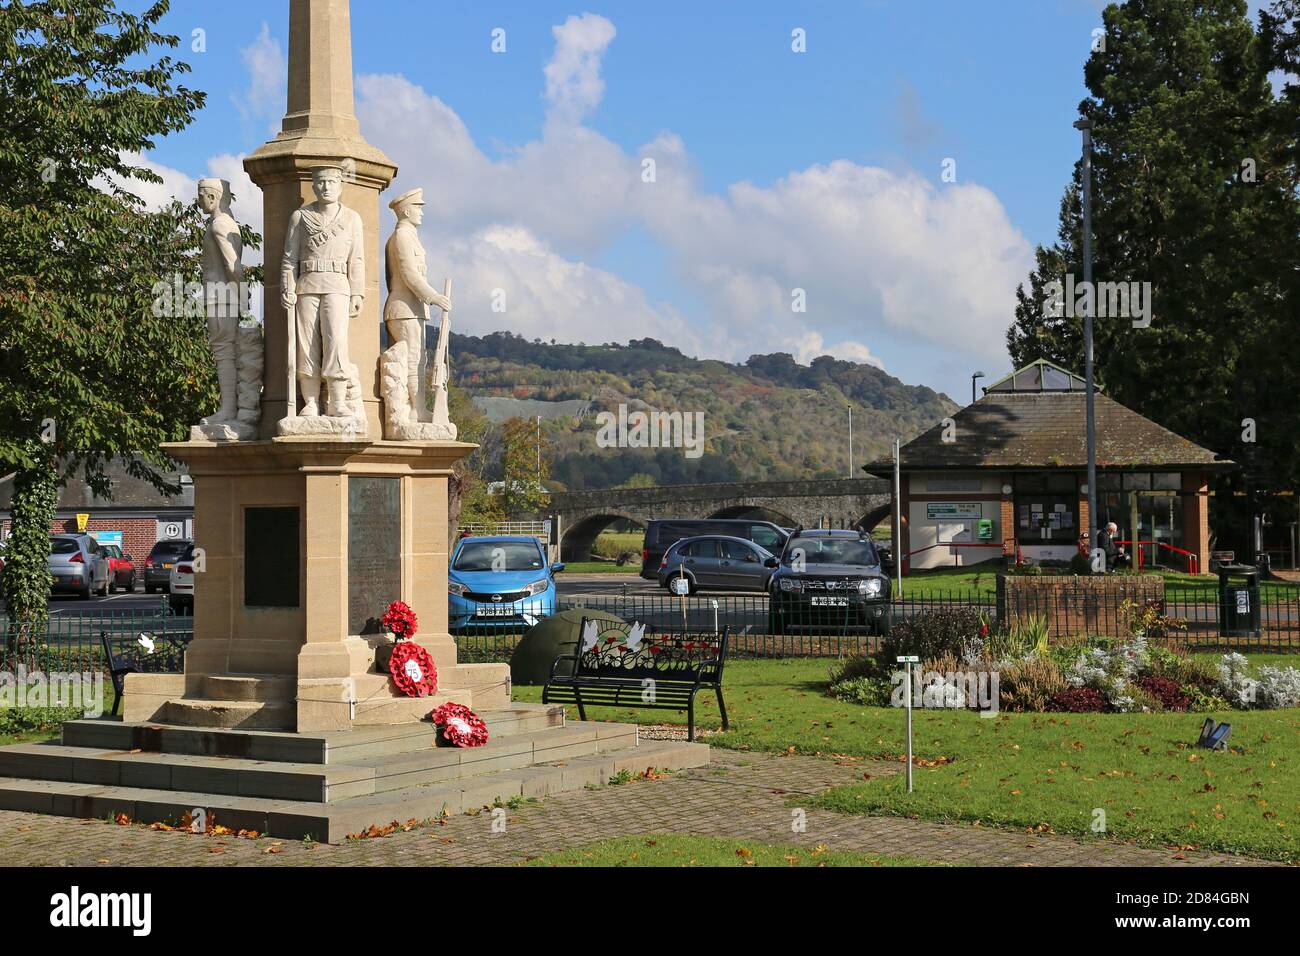 War Memorial and Tourist Information Office, Groe Park, The Strand, Builth Wells, Brecknockshire, Powys, Wales, Great Britain, UK, Europe Stock Photo